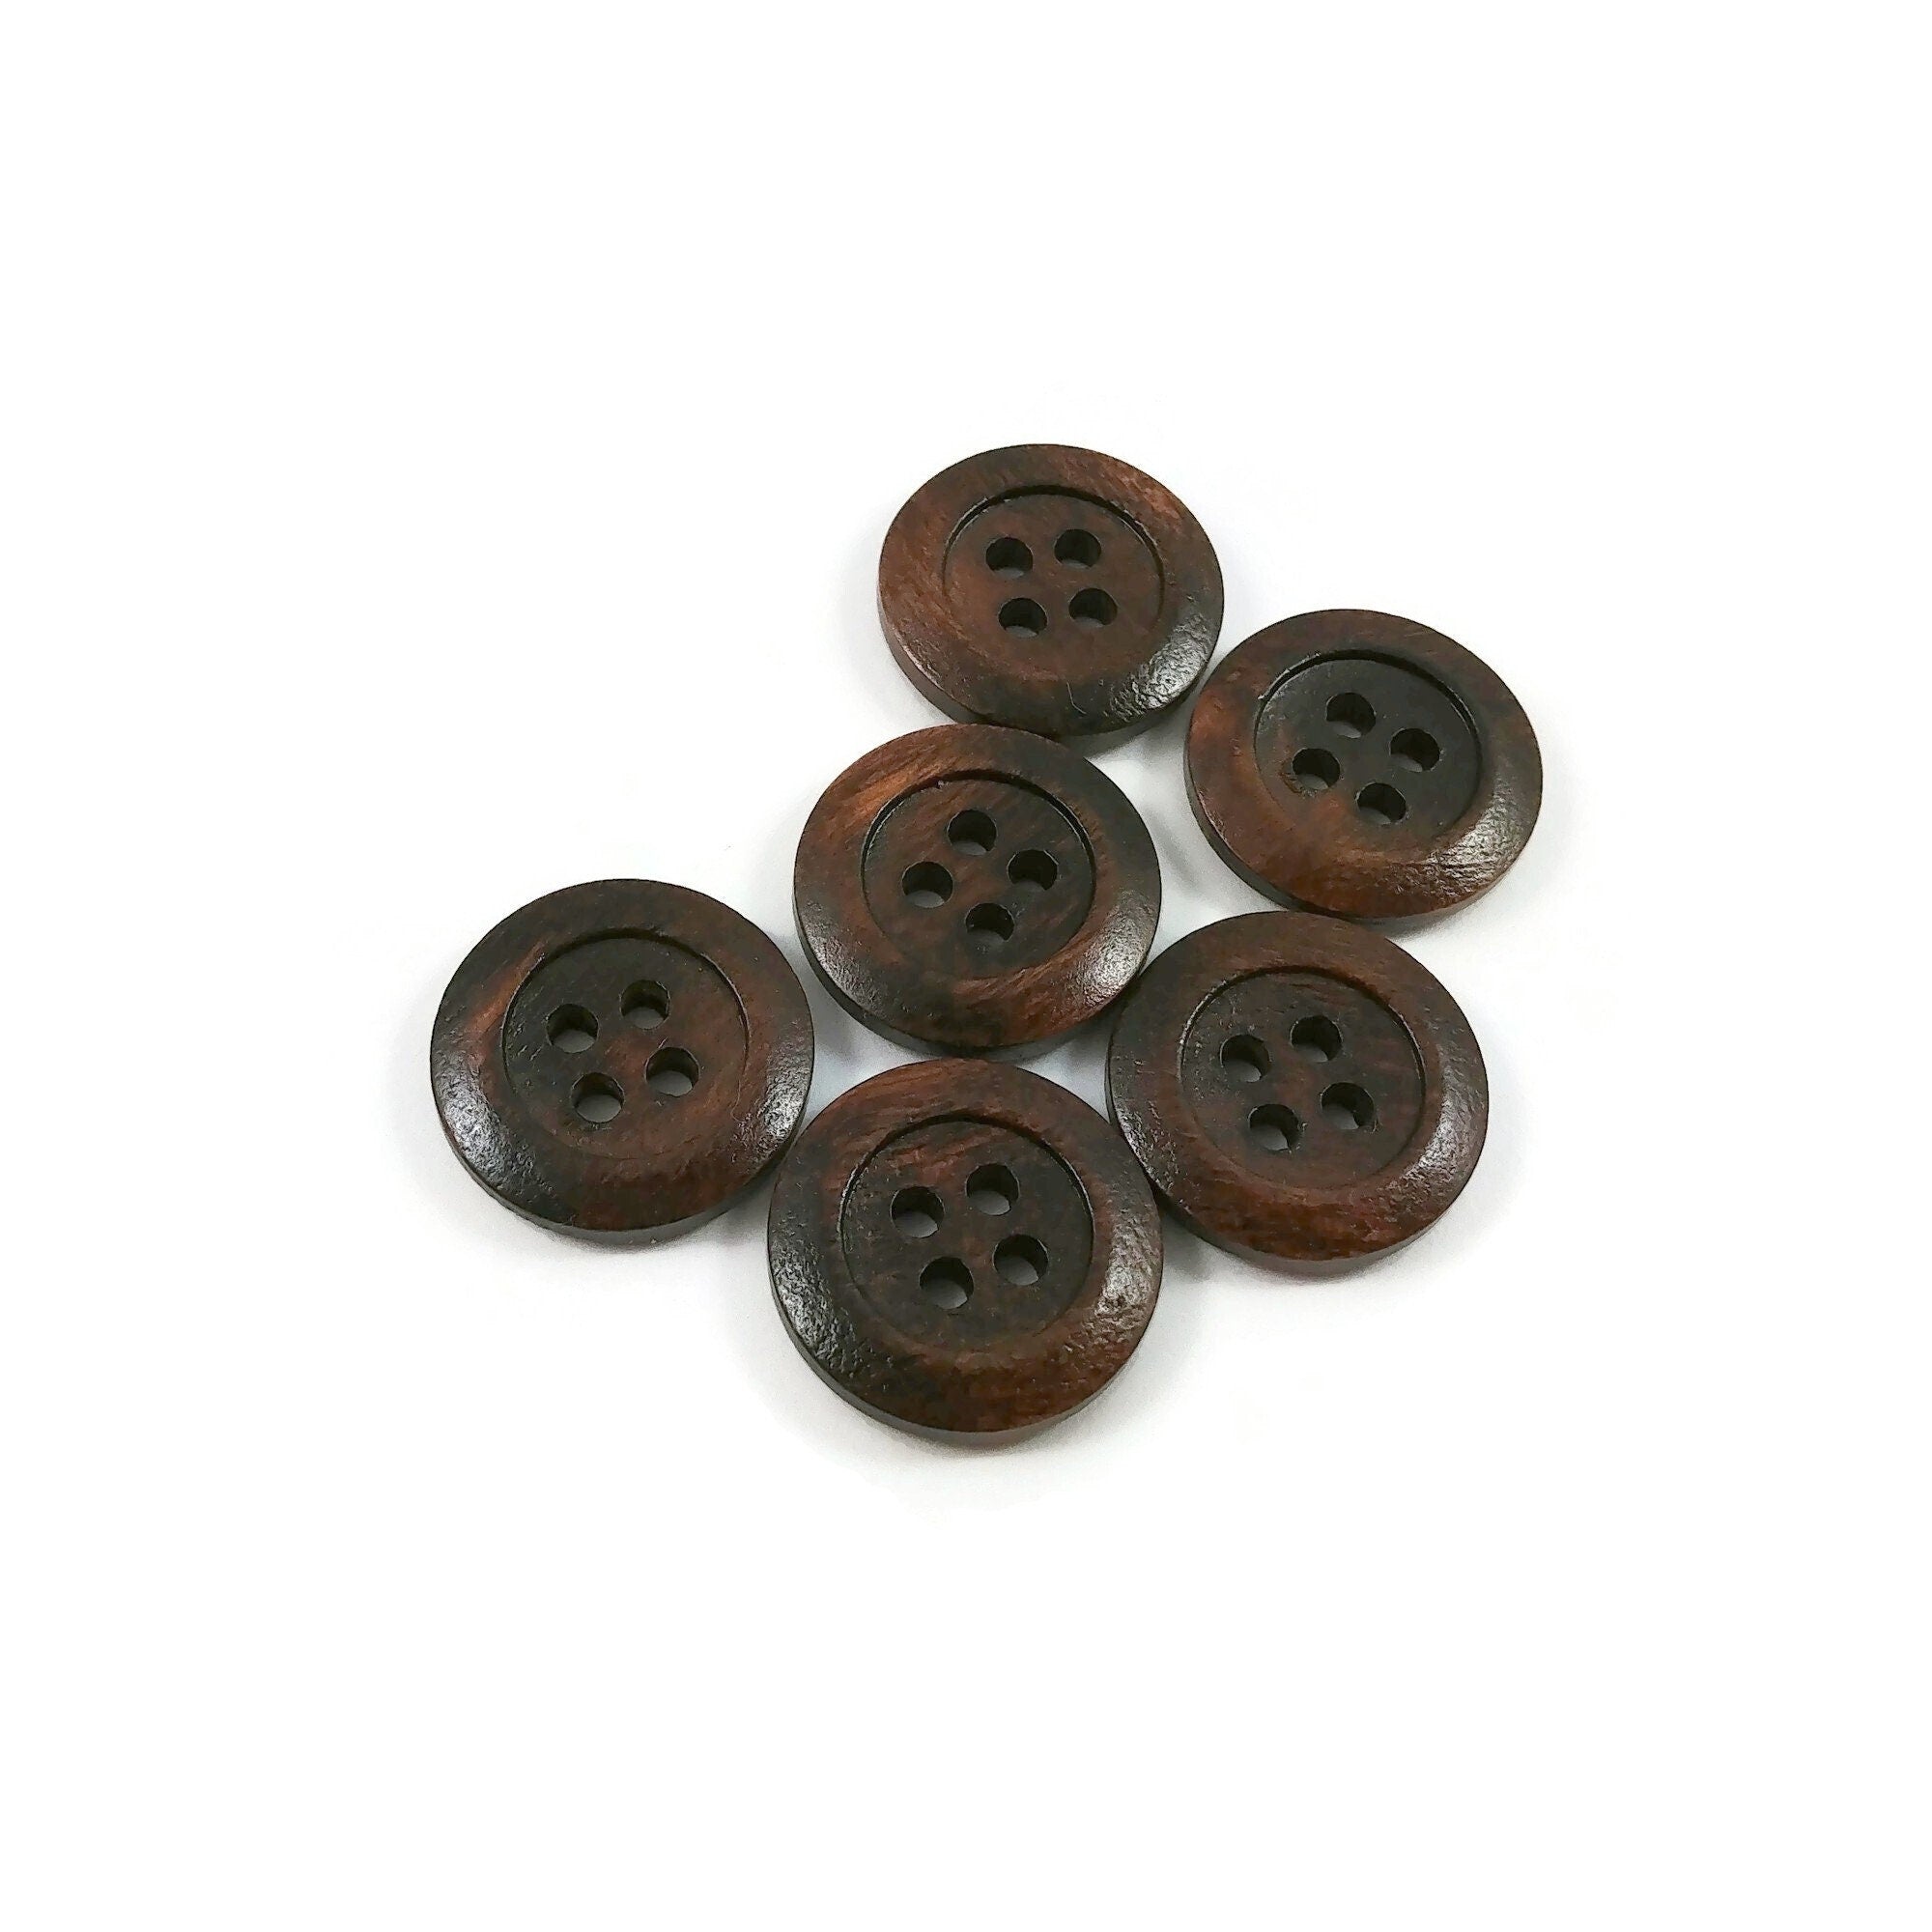 Olive natural wood buttons, 15mm, 20mm, Classic walnut sewing buttons, Made in Italy